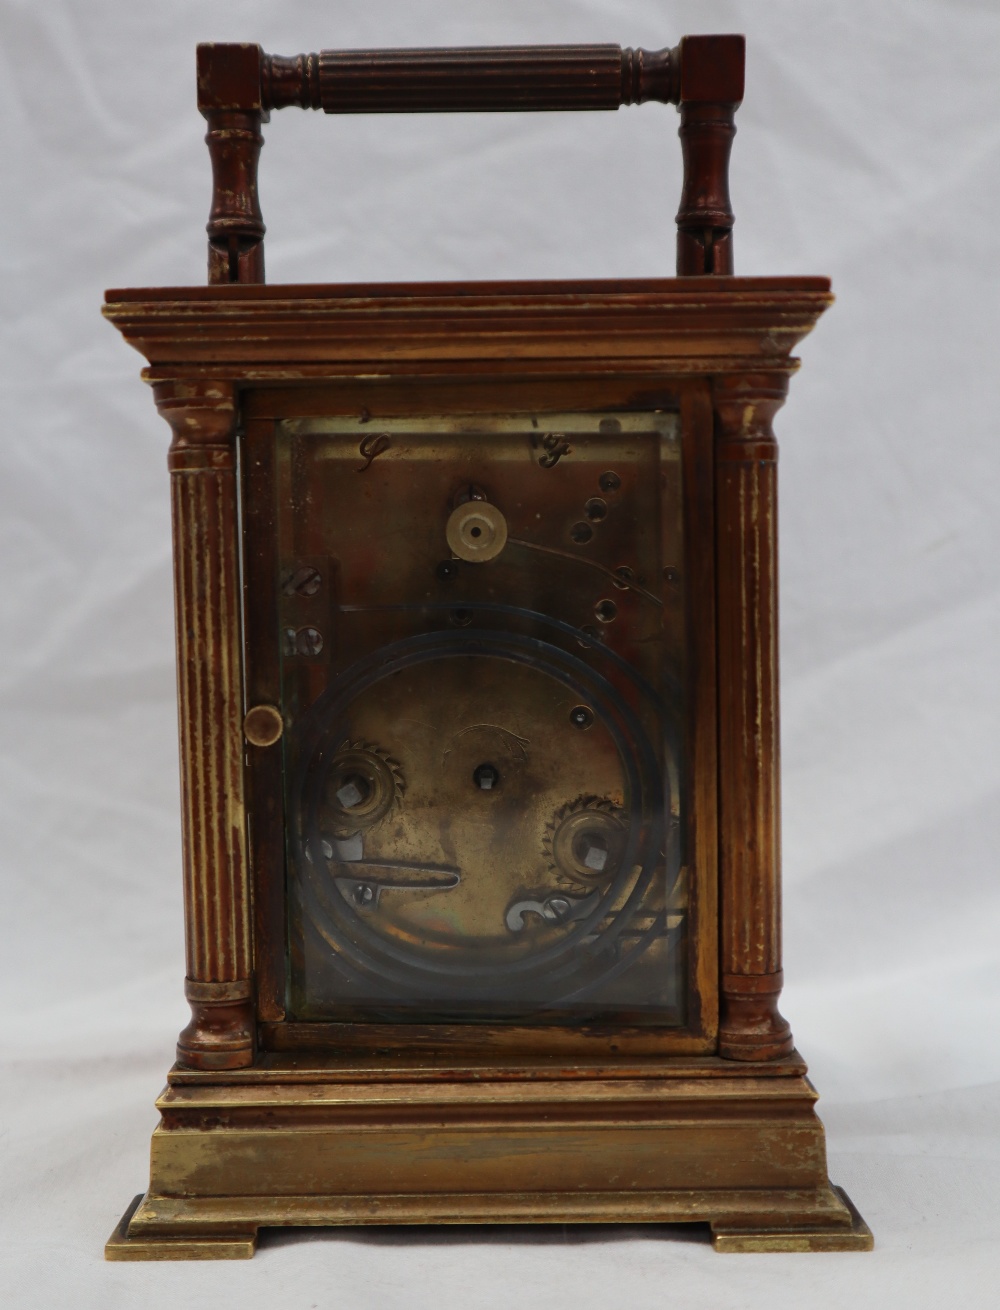 A 20th century brass cased carriage clock, the case with four Ionic columns, - Image 4 of 11